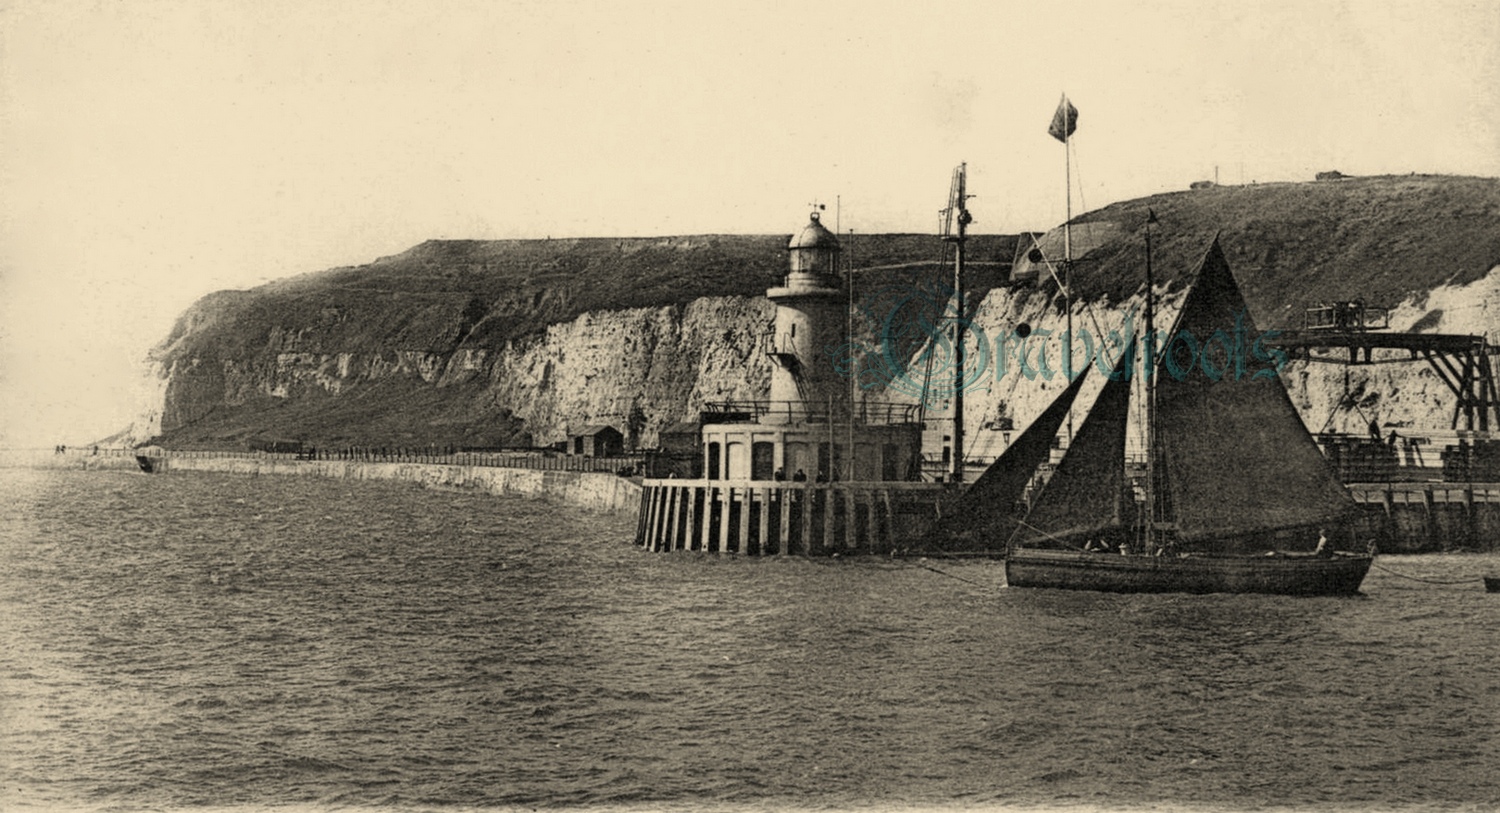  old photo of Newhaven, Sussex - click image to return